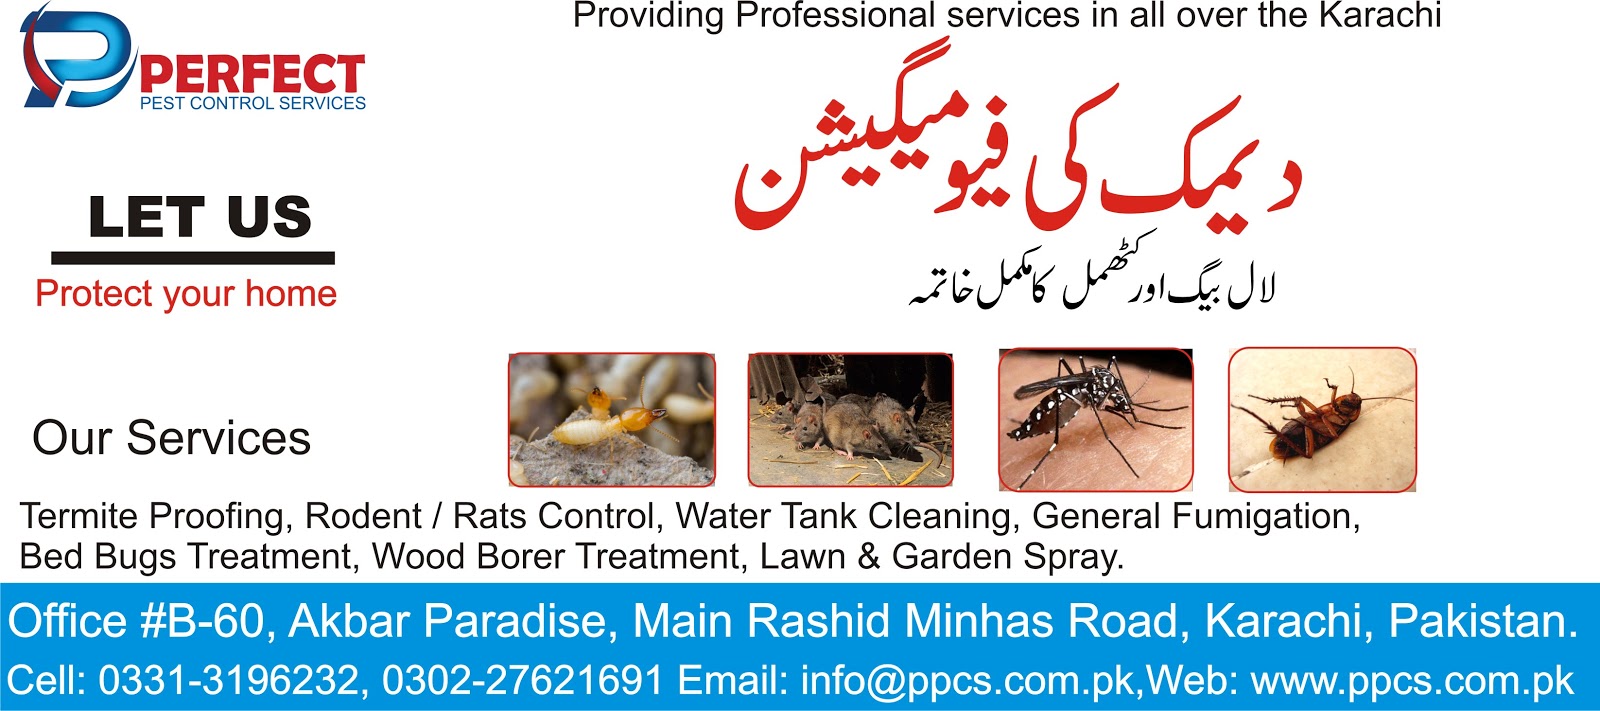 Perfect Pest Control Services | Termite Proofing Treatment | Bedbugs ...